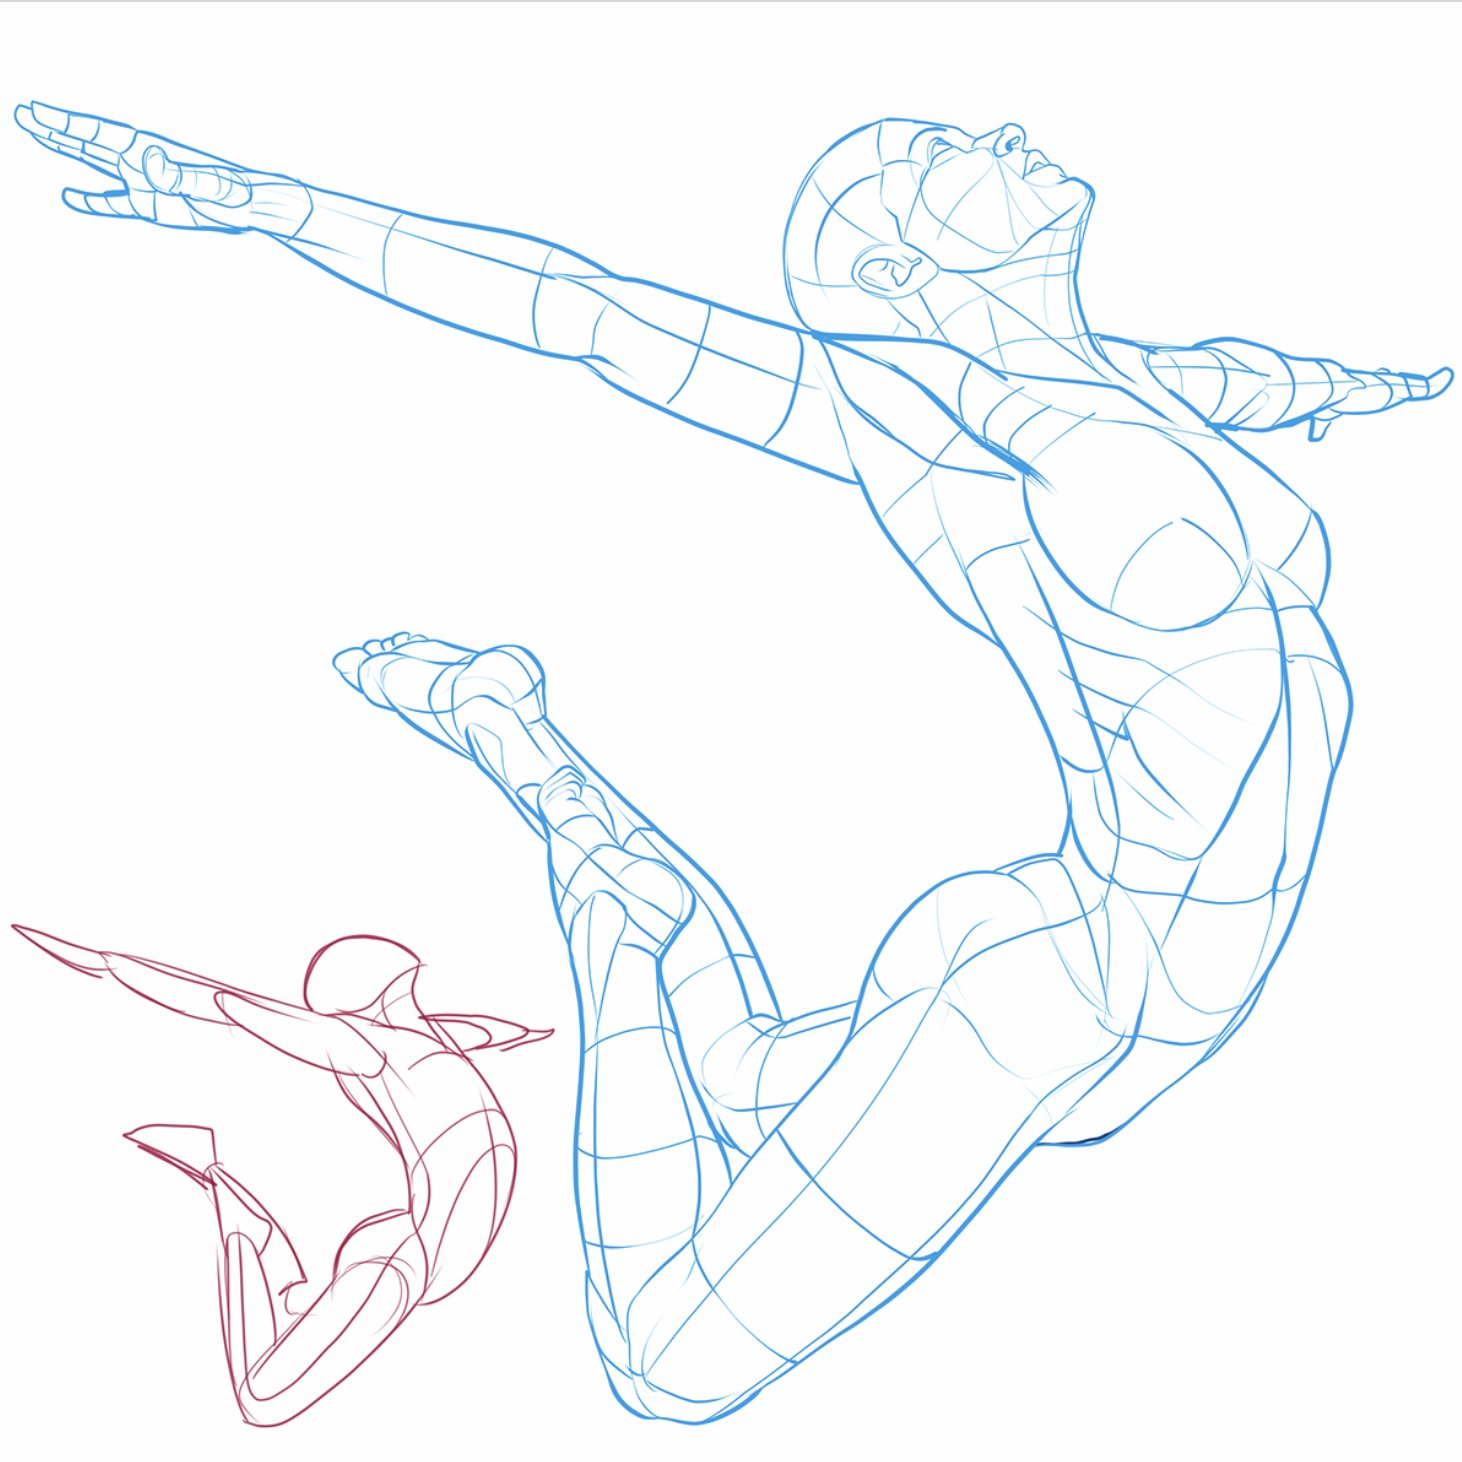 Idol Dance Poses Girl Group 5 Poses - CLIP STUDIO ASSETS